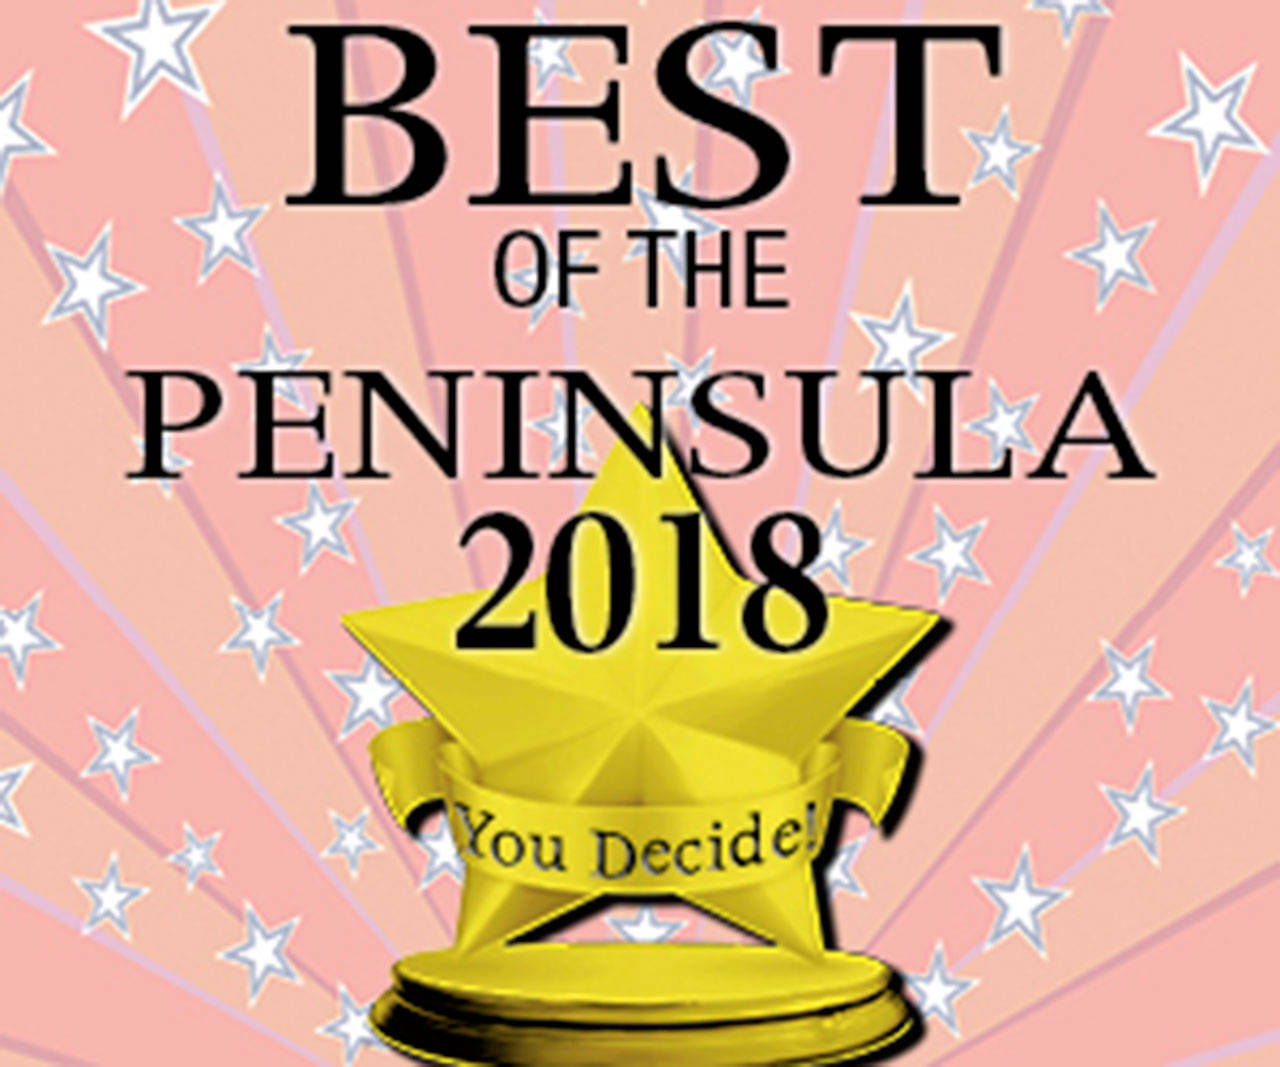 Best of the Peninsula voting is underway now through May 31. Click here to vote today!